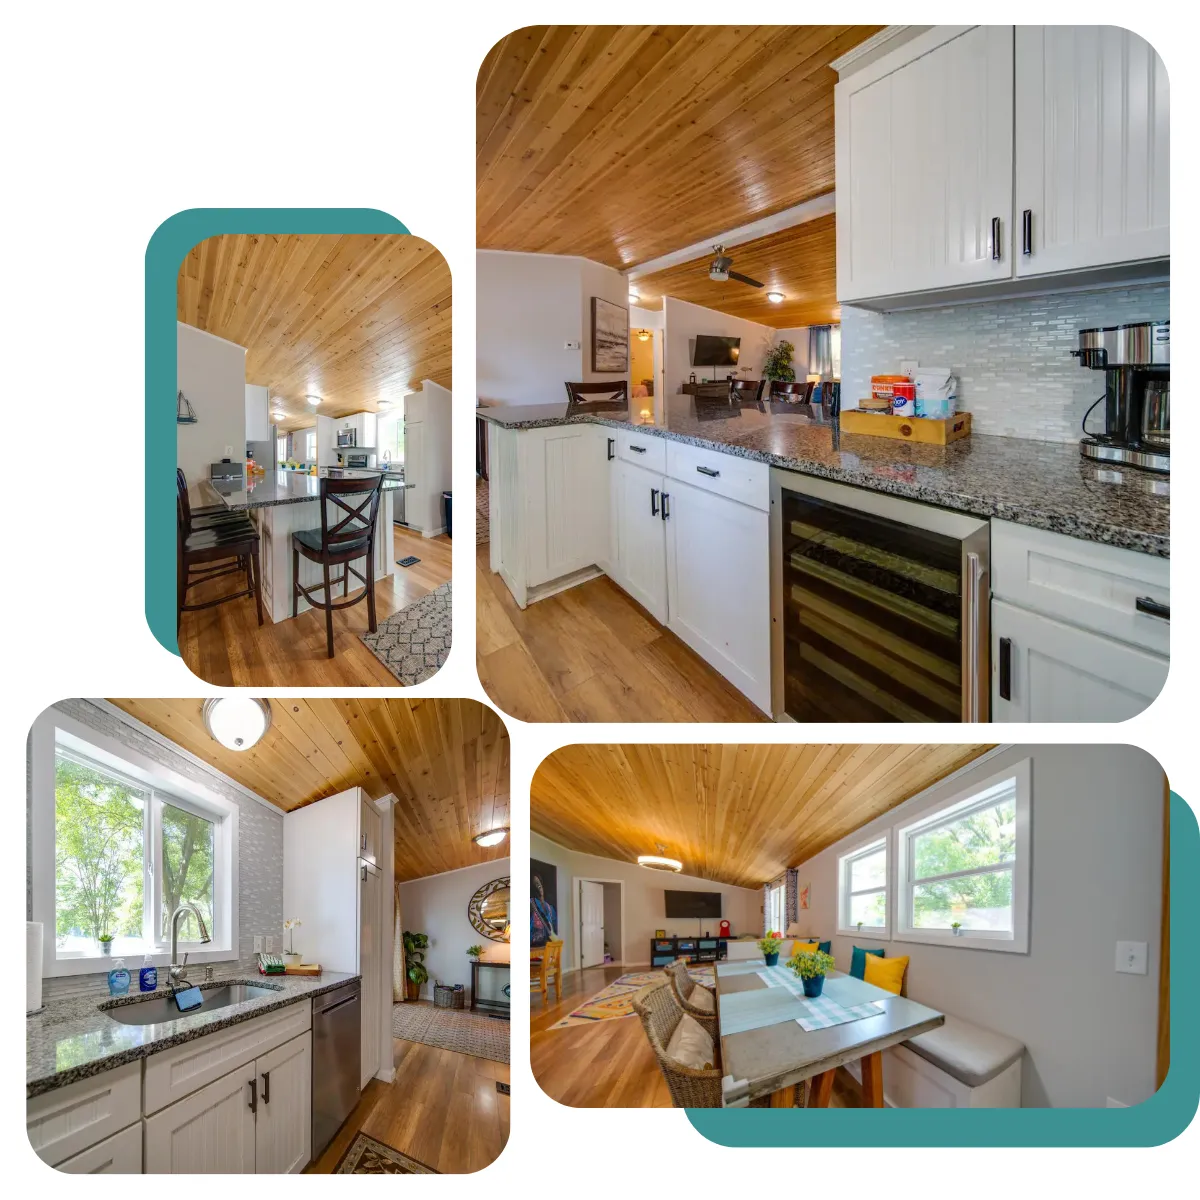 Experience the vibrant kitchen at Lake Wylie Retreat, where cooking becomes enjoyable, creating delicious meals and cherished memories with high-quality appliances and ample counter space, ideal for family gatherings or intimate dining.